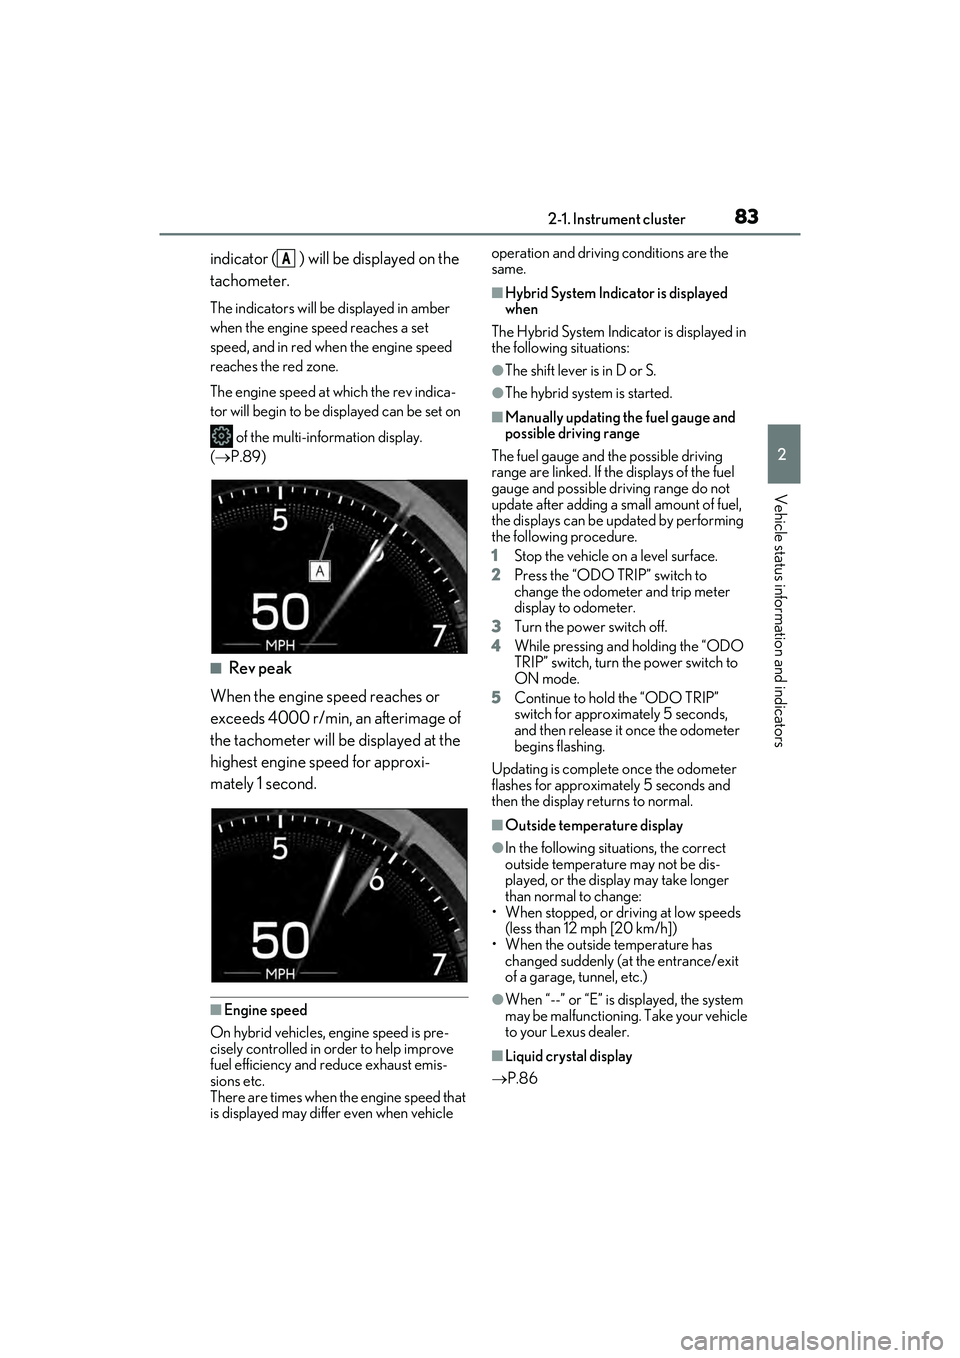 LEXUS ES300h 2022  Owners Manual 832-1. Instrument cluster
2
Vehicle status information and indicators
indicator ( ) will be displayed on the 
tachometer.
The indicators will be displayed in amber 
when the engine speed reaches a set